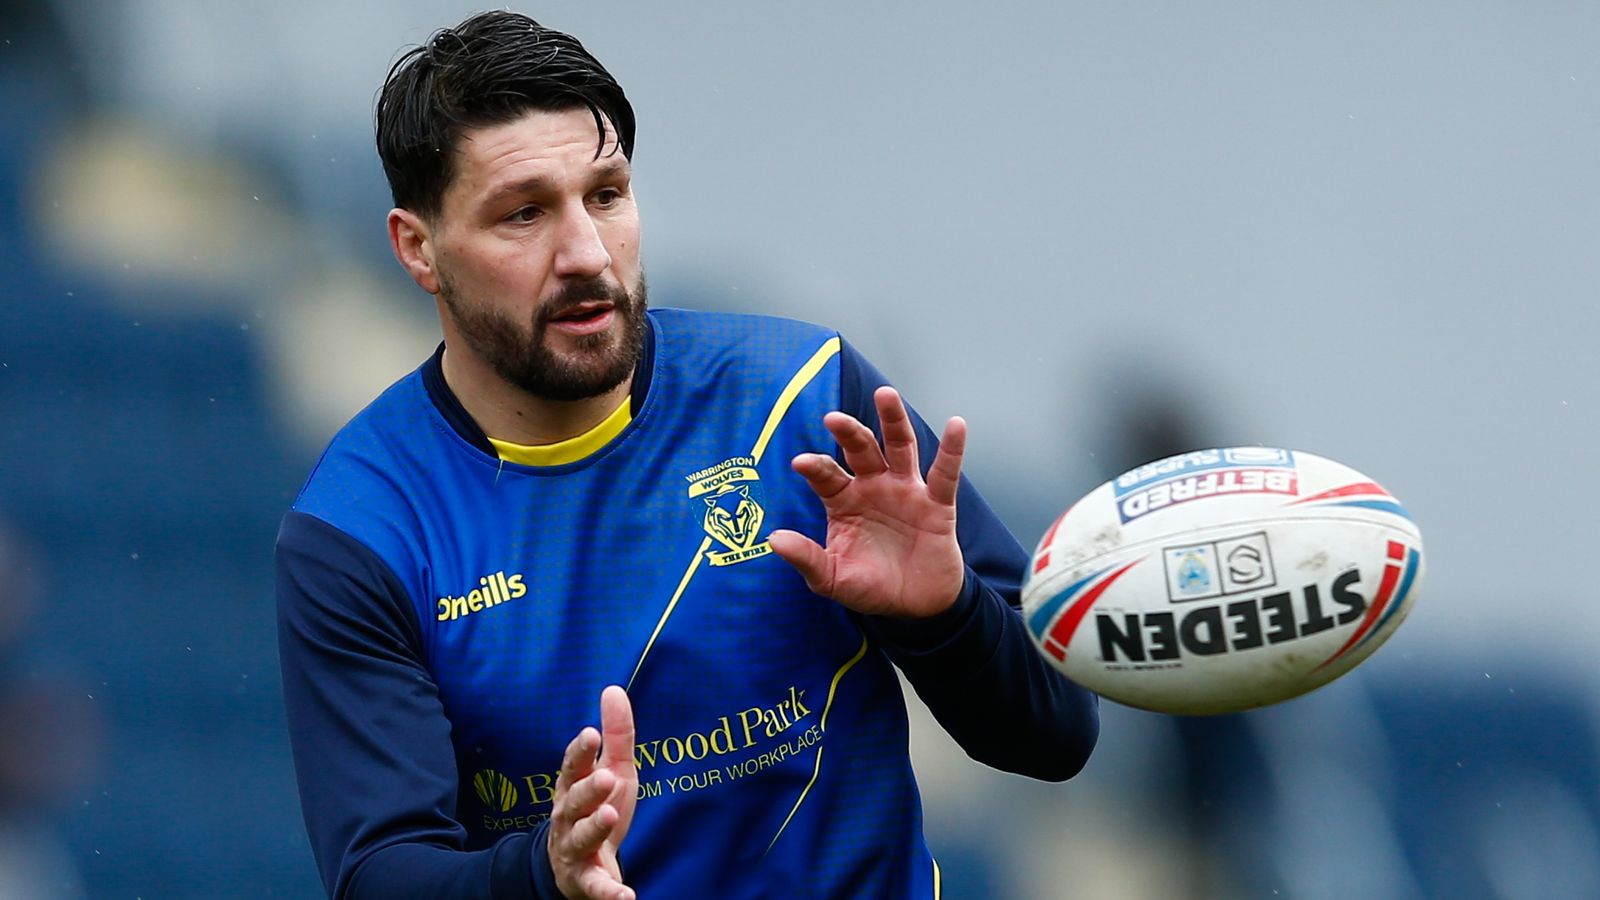 gareth-widdop-signs-for-castleford-tigers-on-two-year-deal